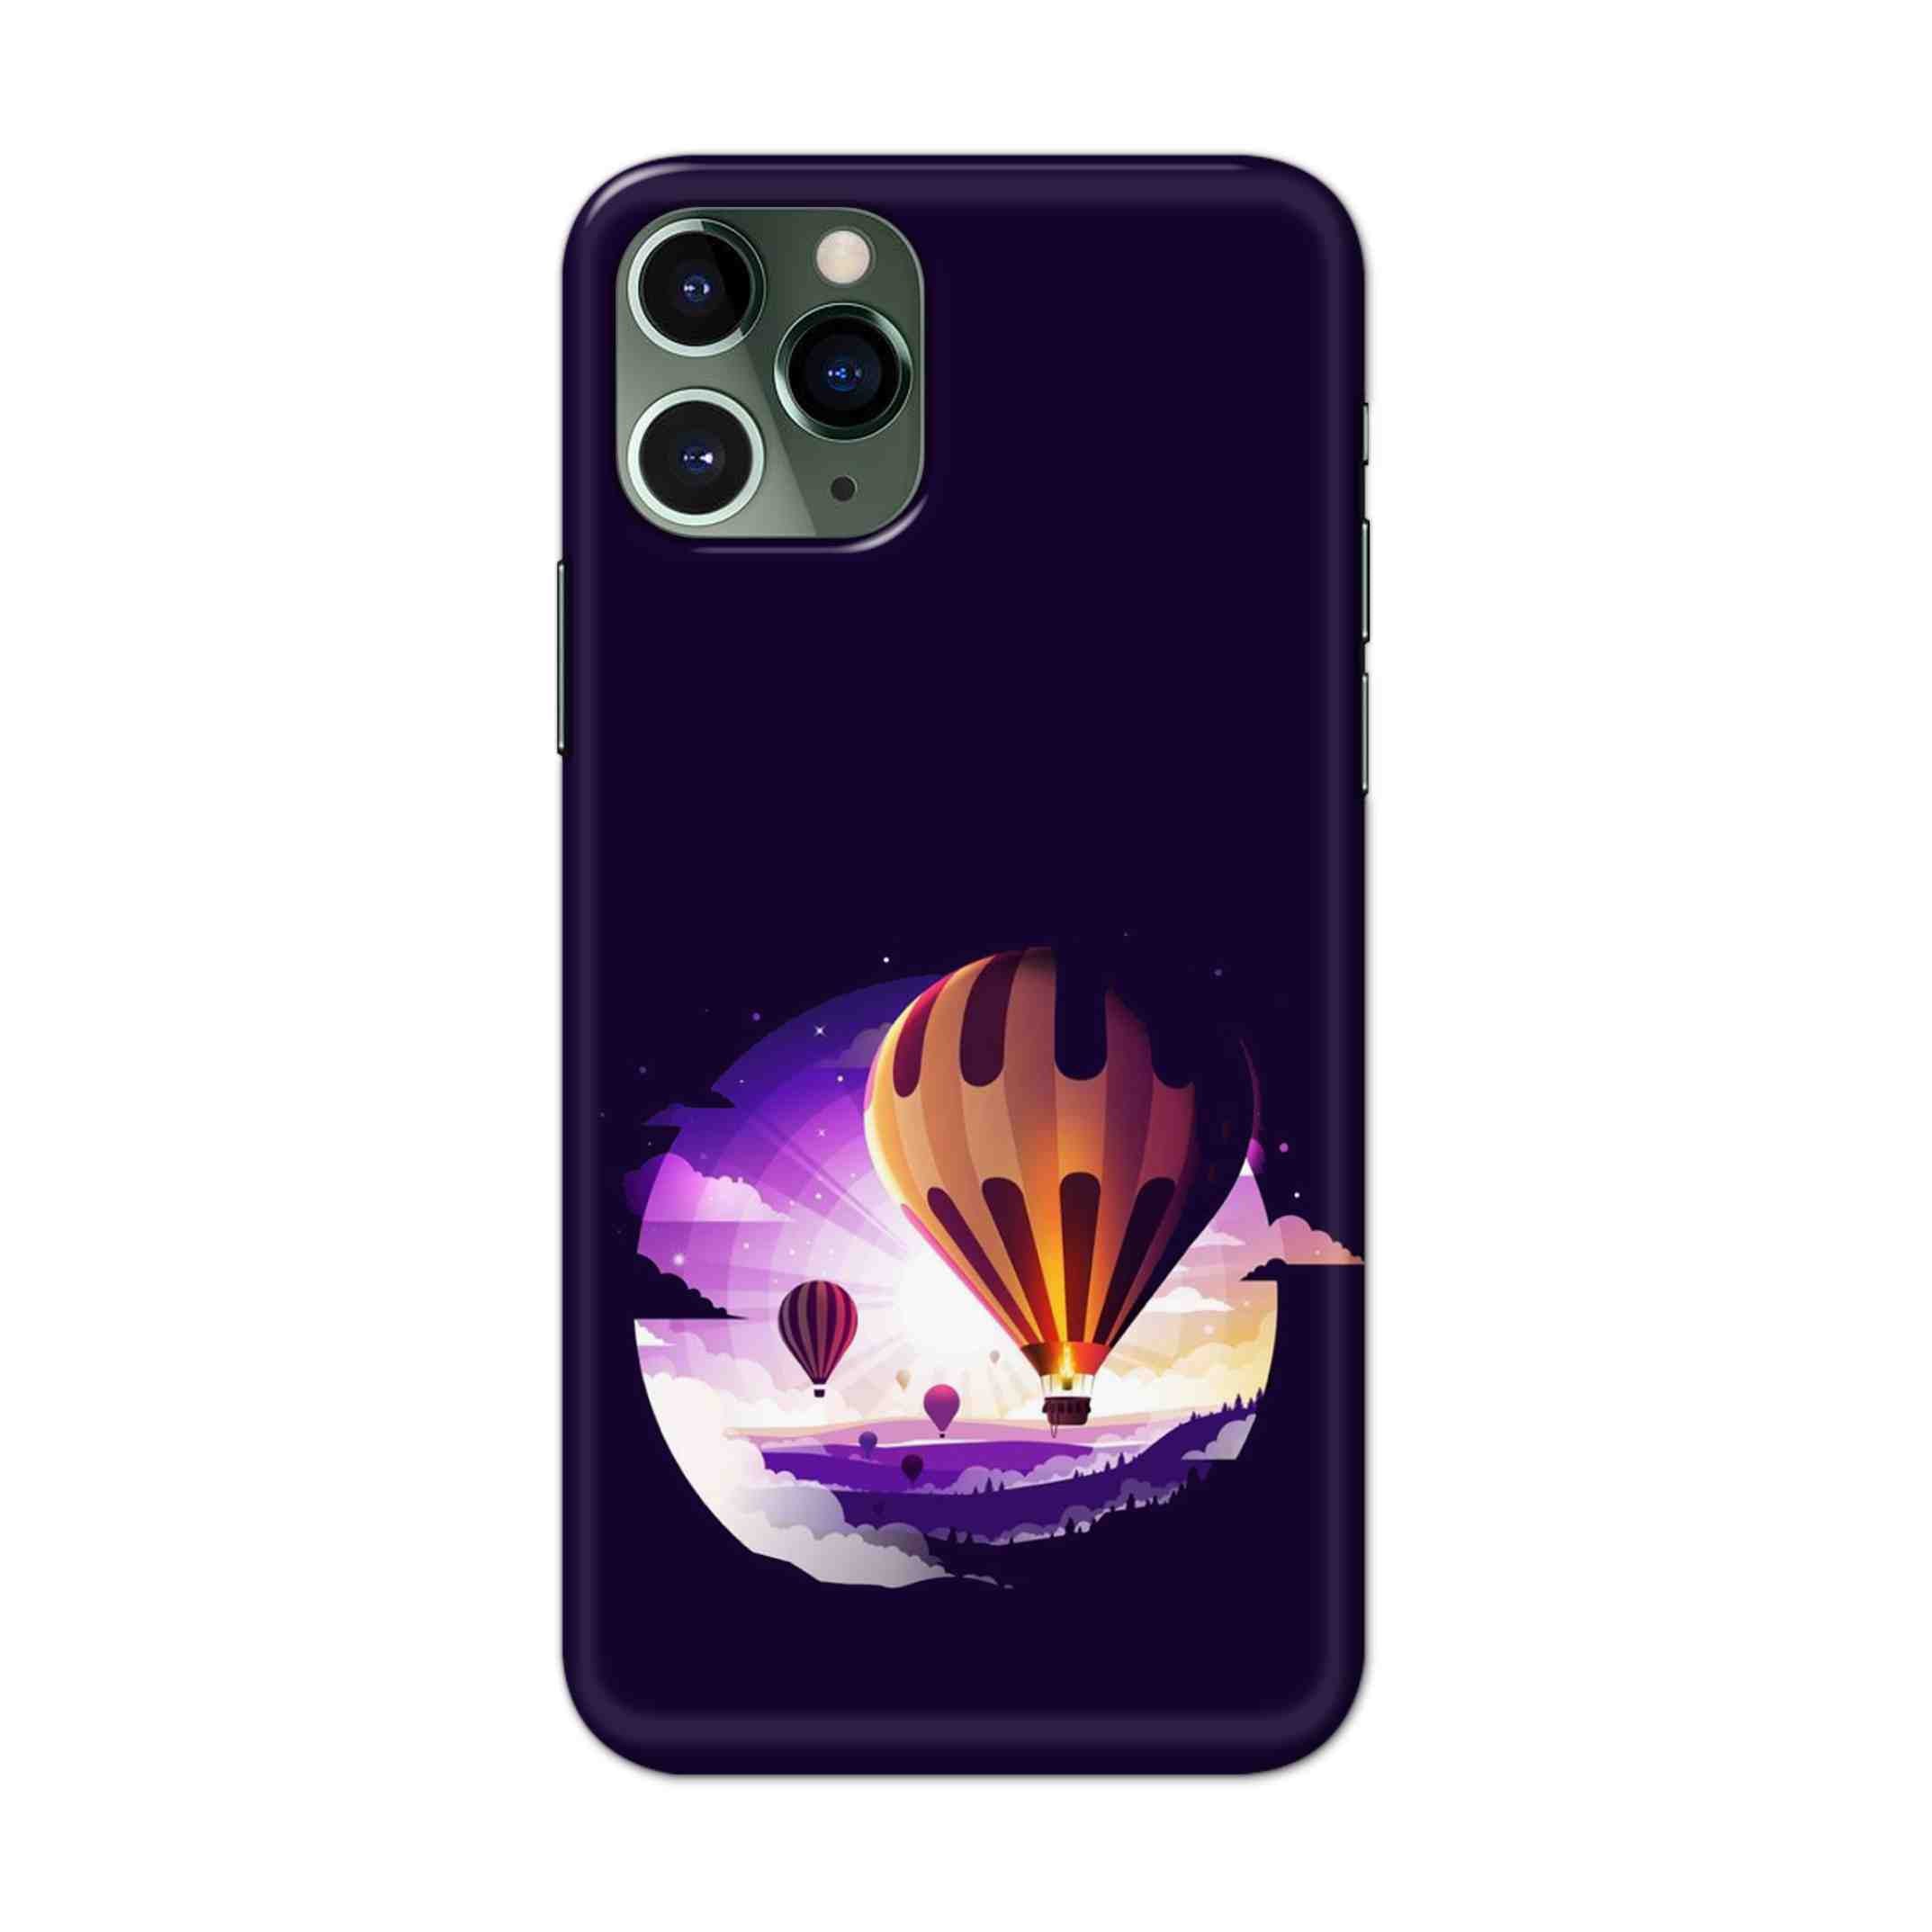 Buy Ballon Hard Back Mobile Phone Case/Cover For iPhone 11 Pro Online